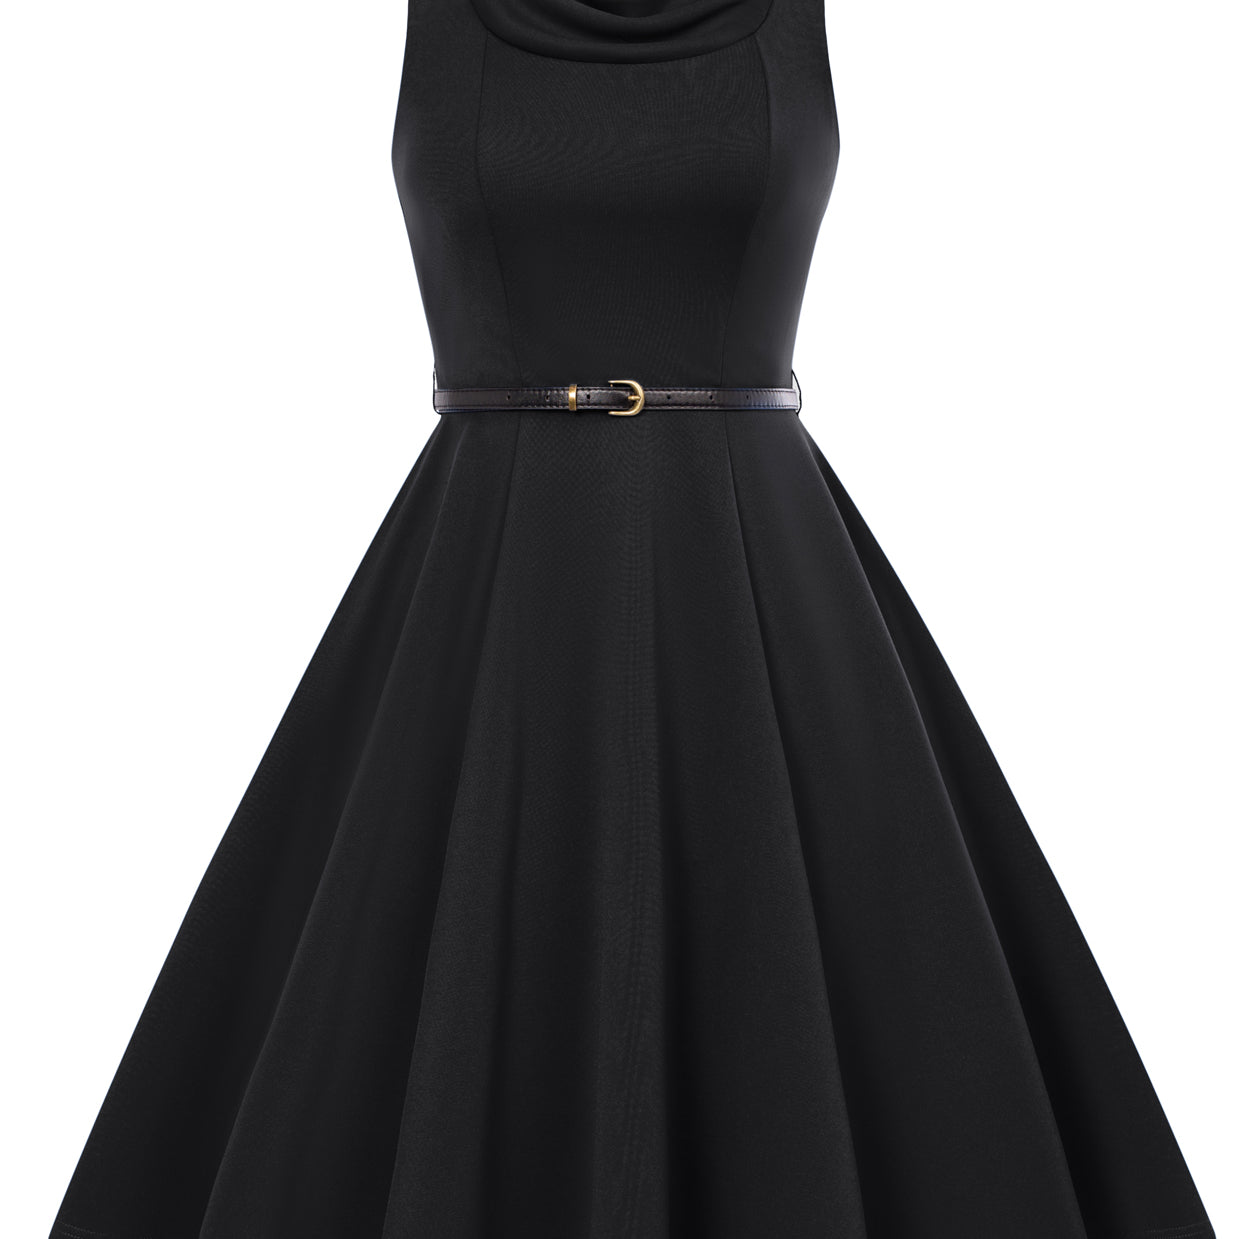 Seckill Offer⌛Sleeveless A Line Dress Vintage Cocktail Party Dress Swing Dress for Wedding Guest